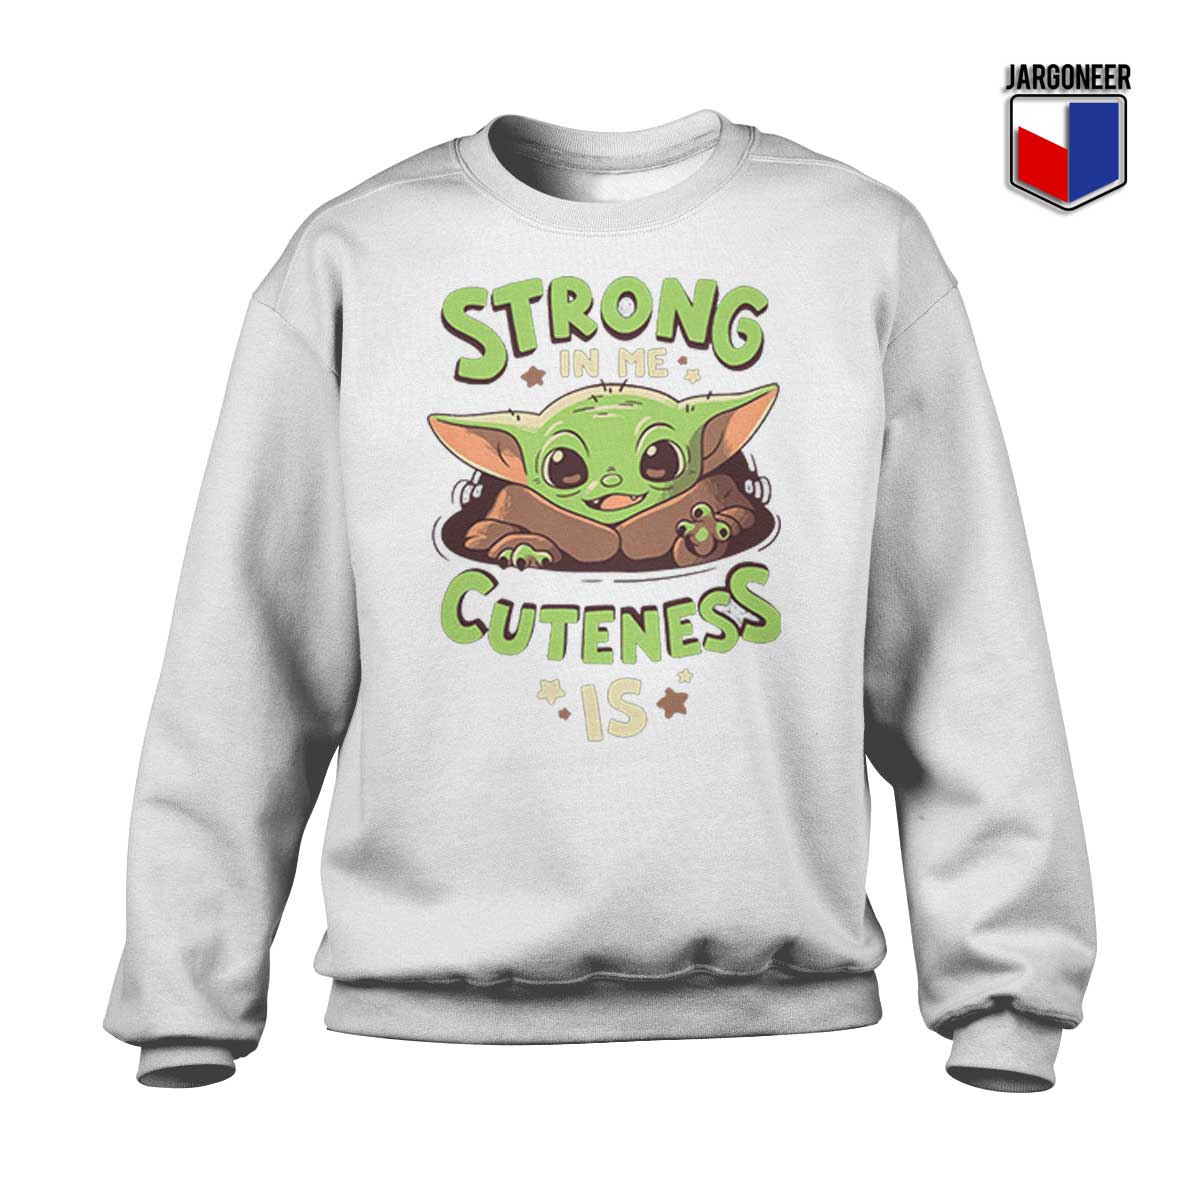 Strong In Me Cuteness Is Yoda Sweatshirt - Shop Unique Graphic Cool Shirt Designs